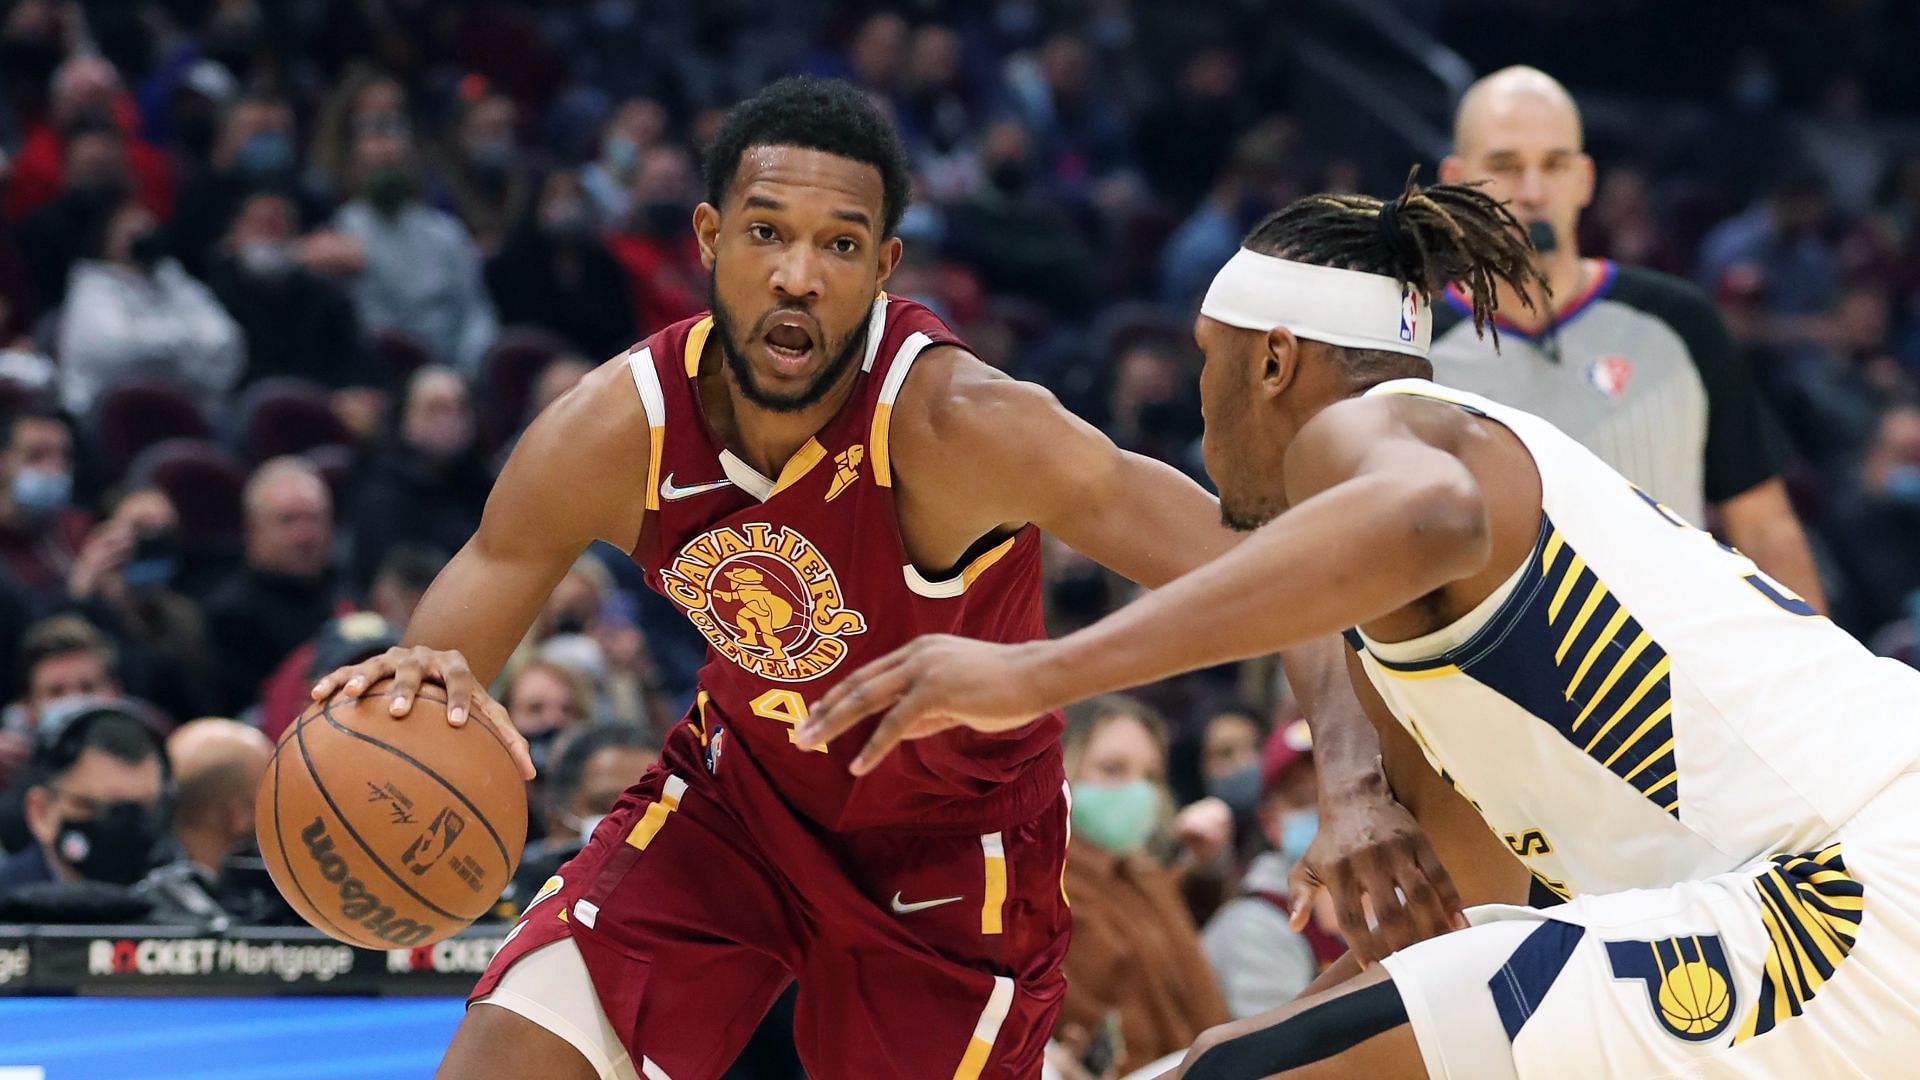 The visiting Cleveland Cavaliers are looking to go 3-0 up against the Indiana Pacers in their season series. [Photo: NBA.com]